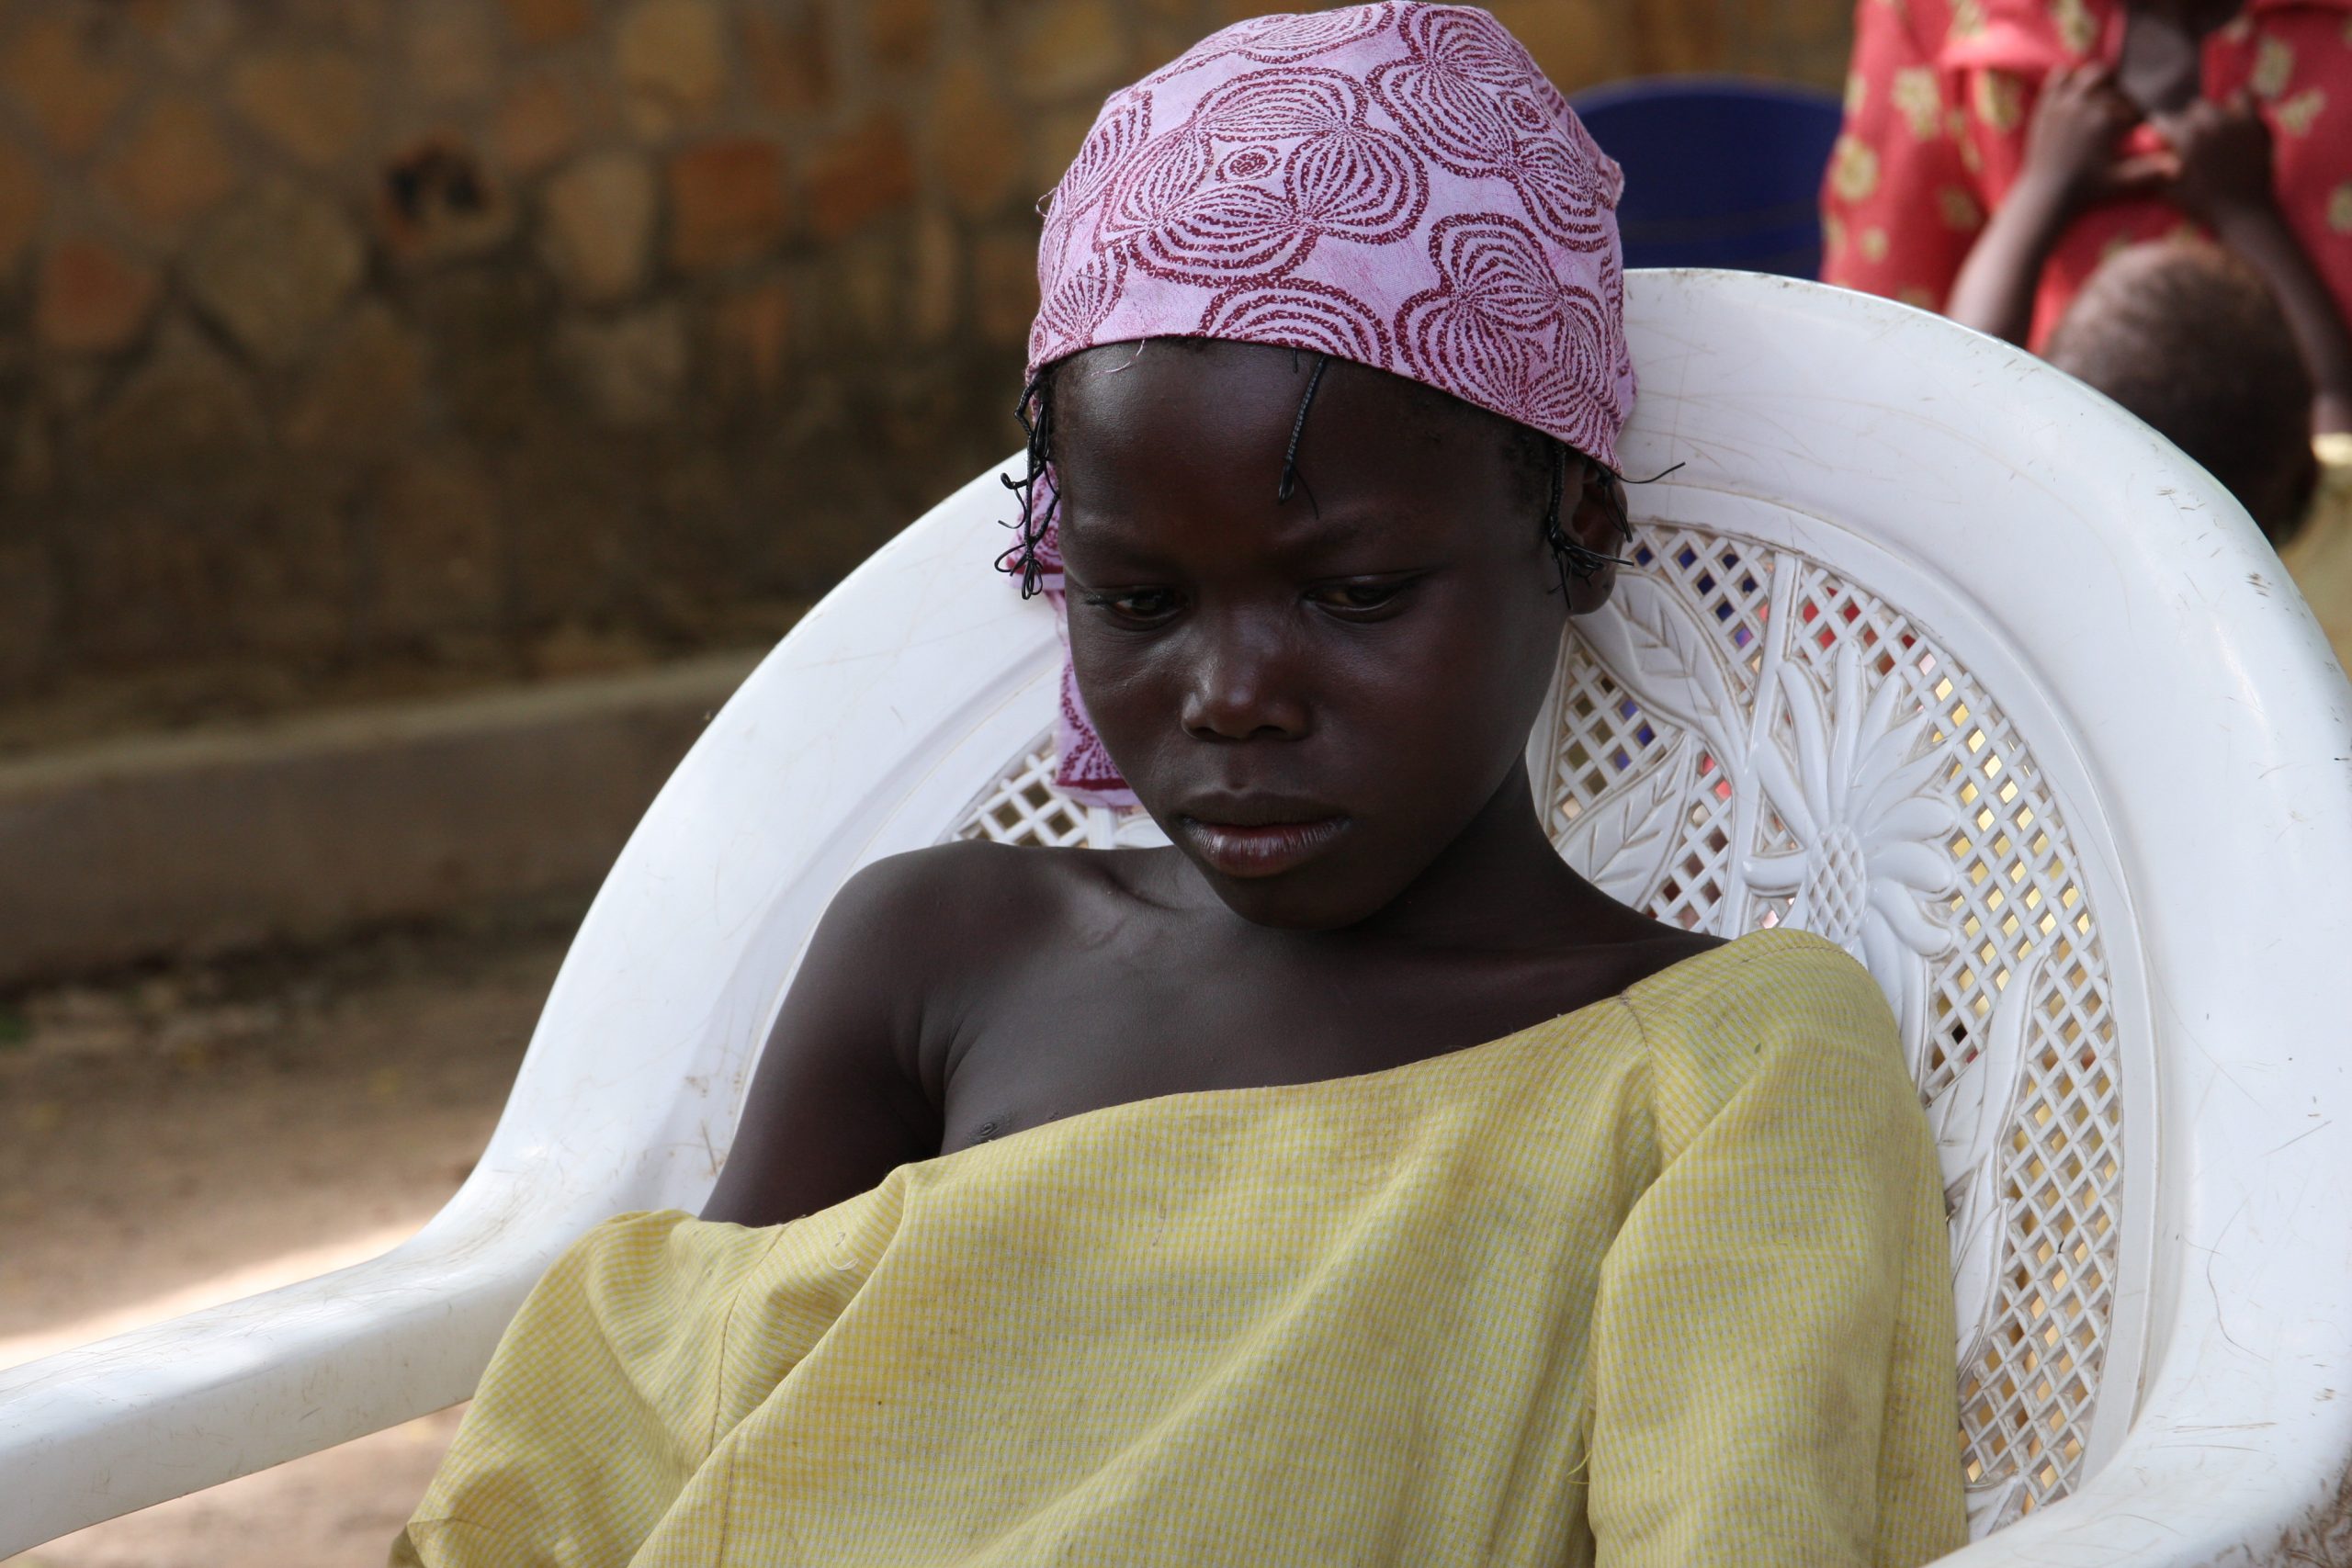 A young Nigerian Girl wearing an oversized dirty yellow dress, a pink and purple scarf on her head, sits in a white plastic chair